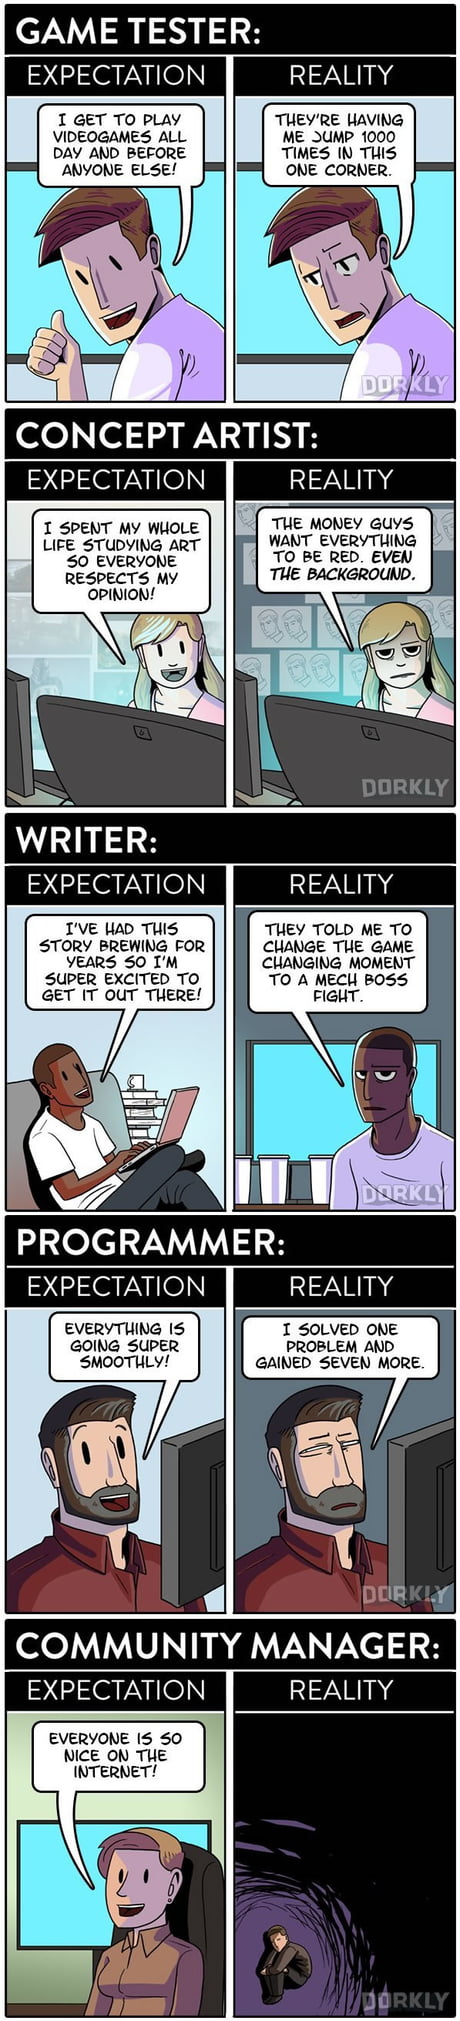 The Life of a Gamer: Expectation vs. Reality - Placeit Blog